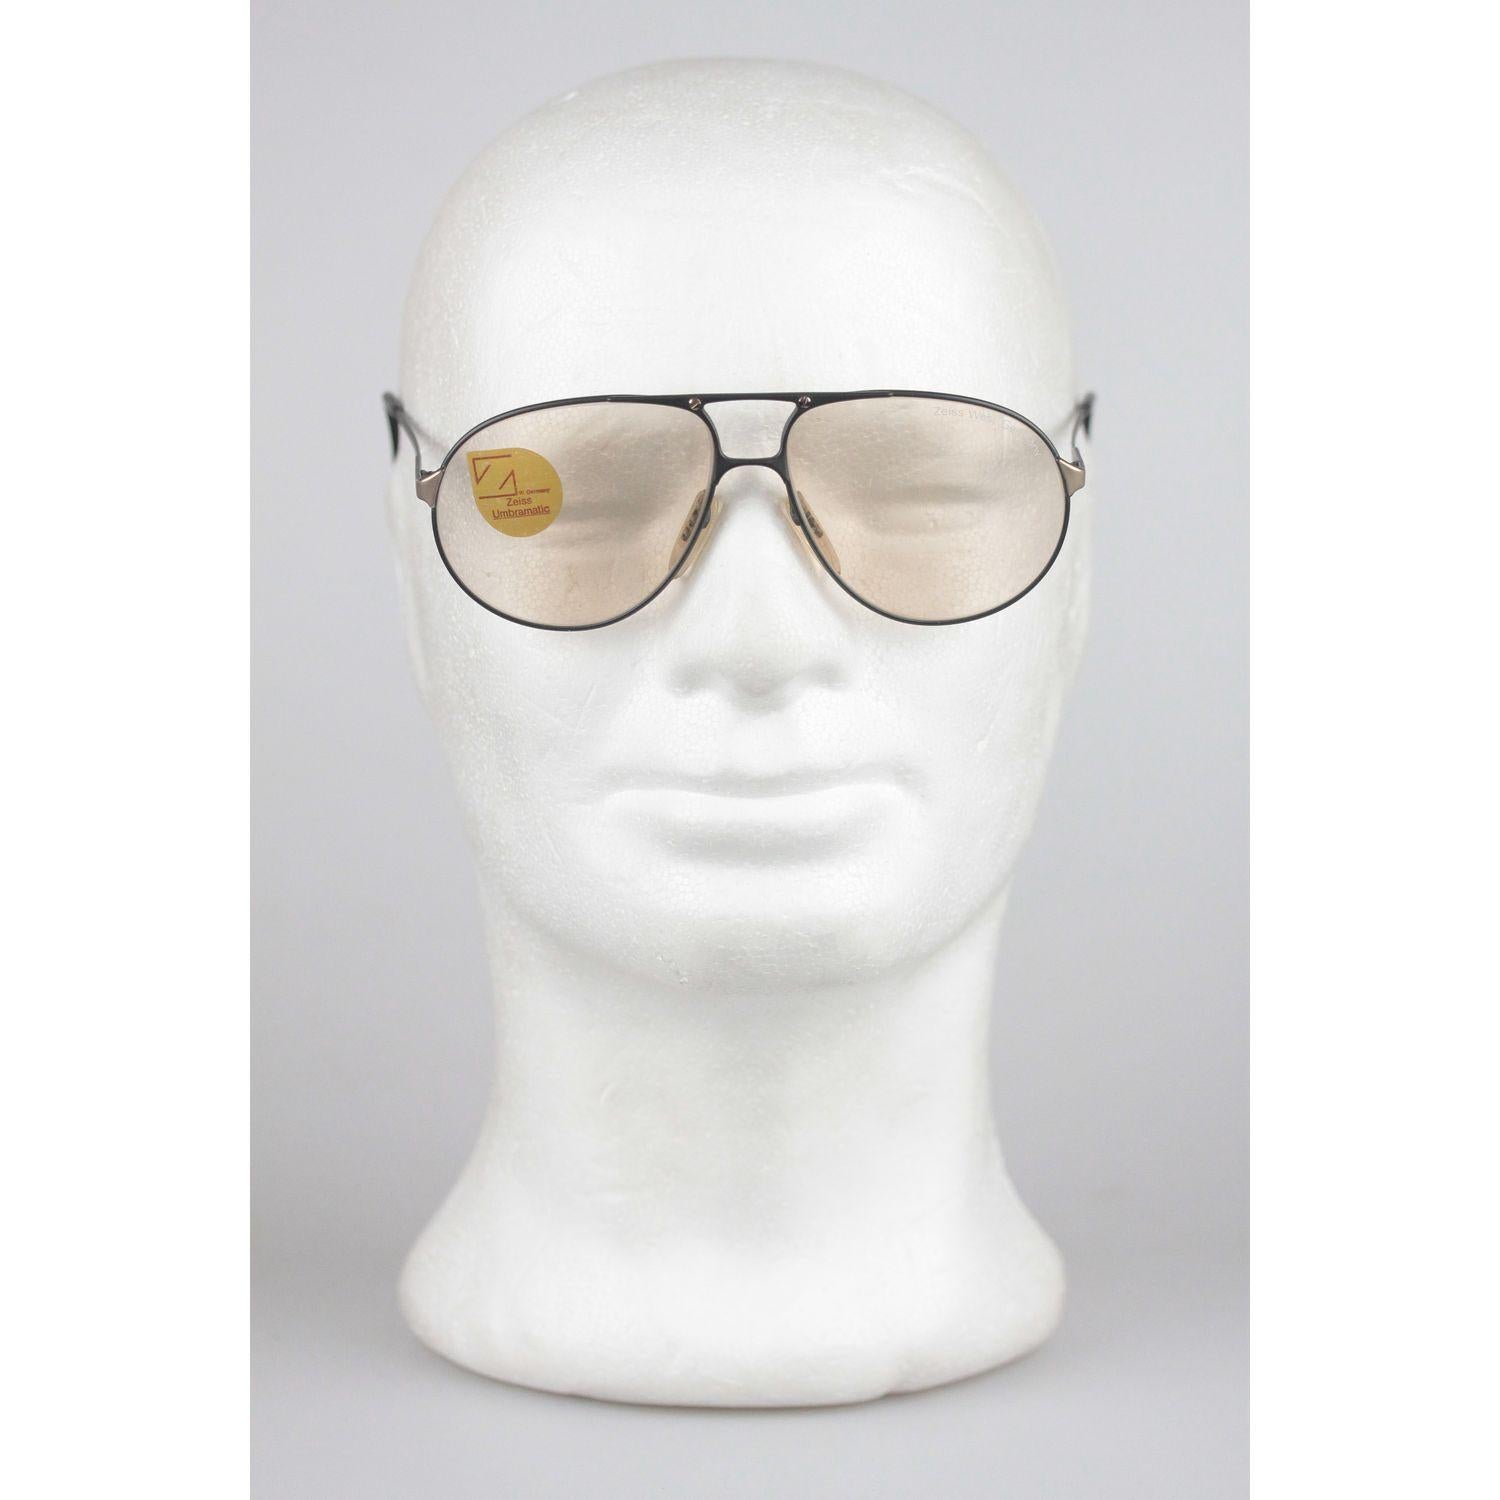 - Gray metal sunglasses by Zeiss from the early 80s
- Made in West Germany
- Original 'Umbramatic lenses' darken automatically in the sun
- 100% UV lens
- Aviator-design from West Germany
- Lightweight & very pleasant to wear 
- Style & Mod.: 9289 -